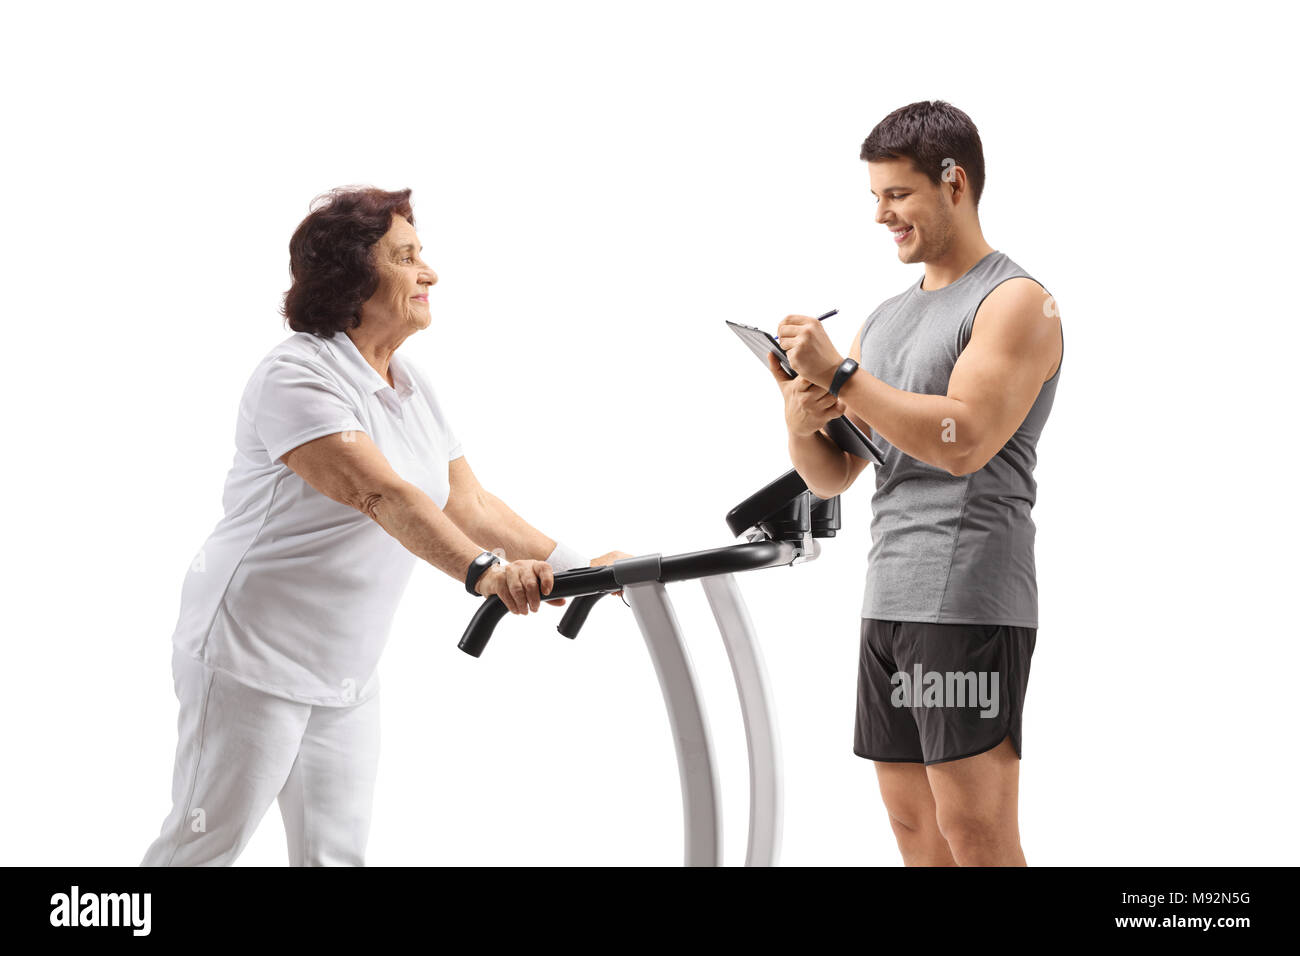 Mature woman exercising on a treadmill with a personal trainer writing in a clipboard isolated on white background Stock Photo